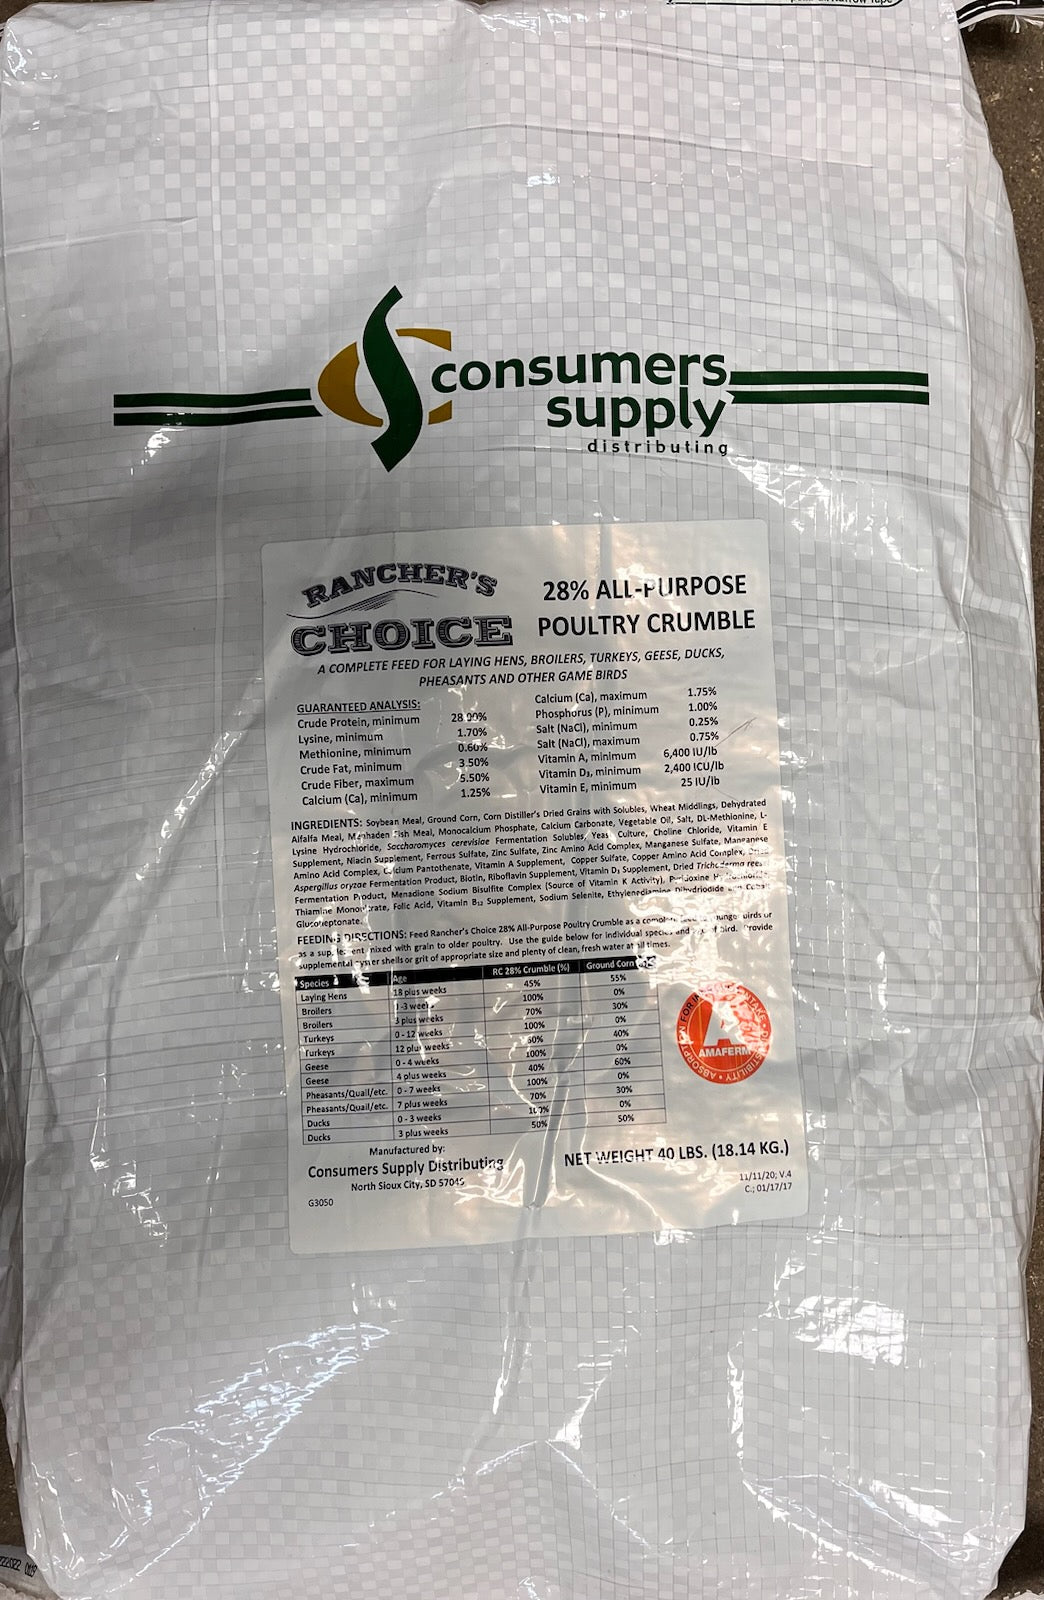 Rancher's Choice 28% All-Purpose Poultry Crumble